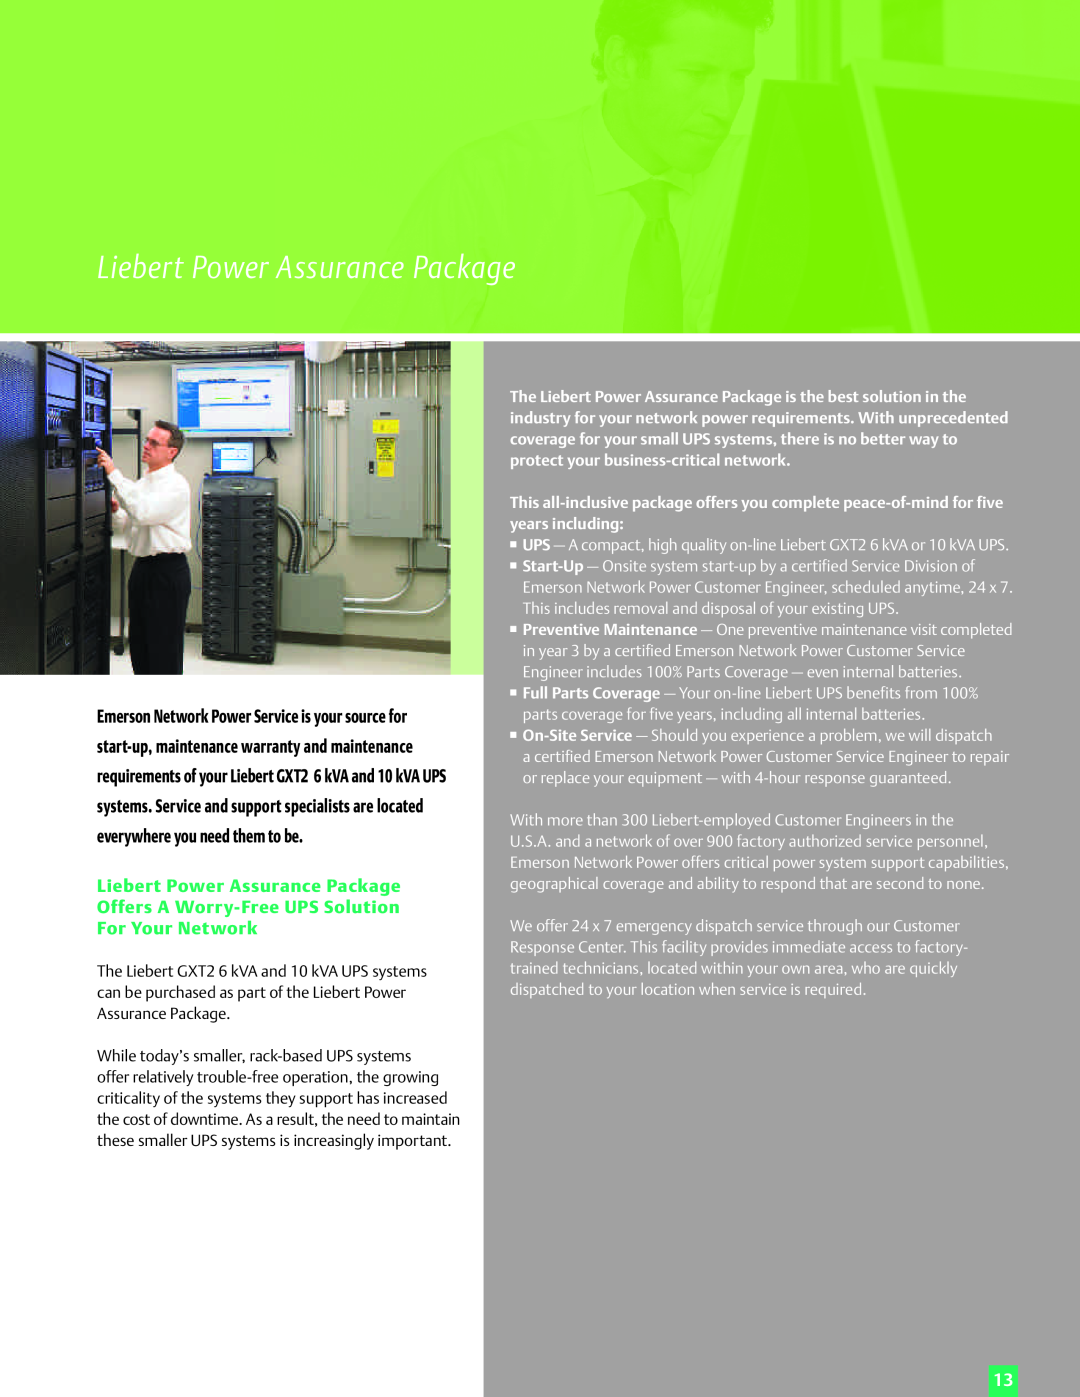 Emerson 10 kVA, 6 kVA manual Liebert Power Assurance Package Offers A Worry-Free UPS Solution, For Your Network 